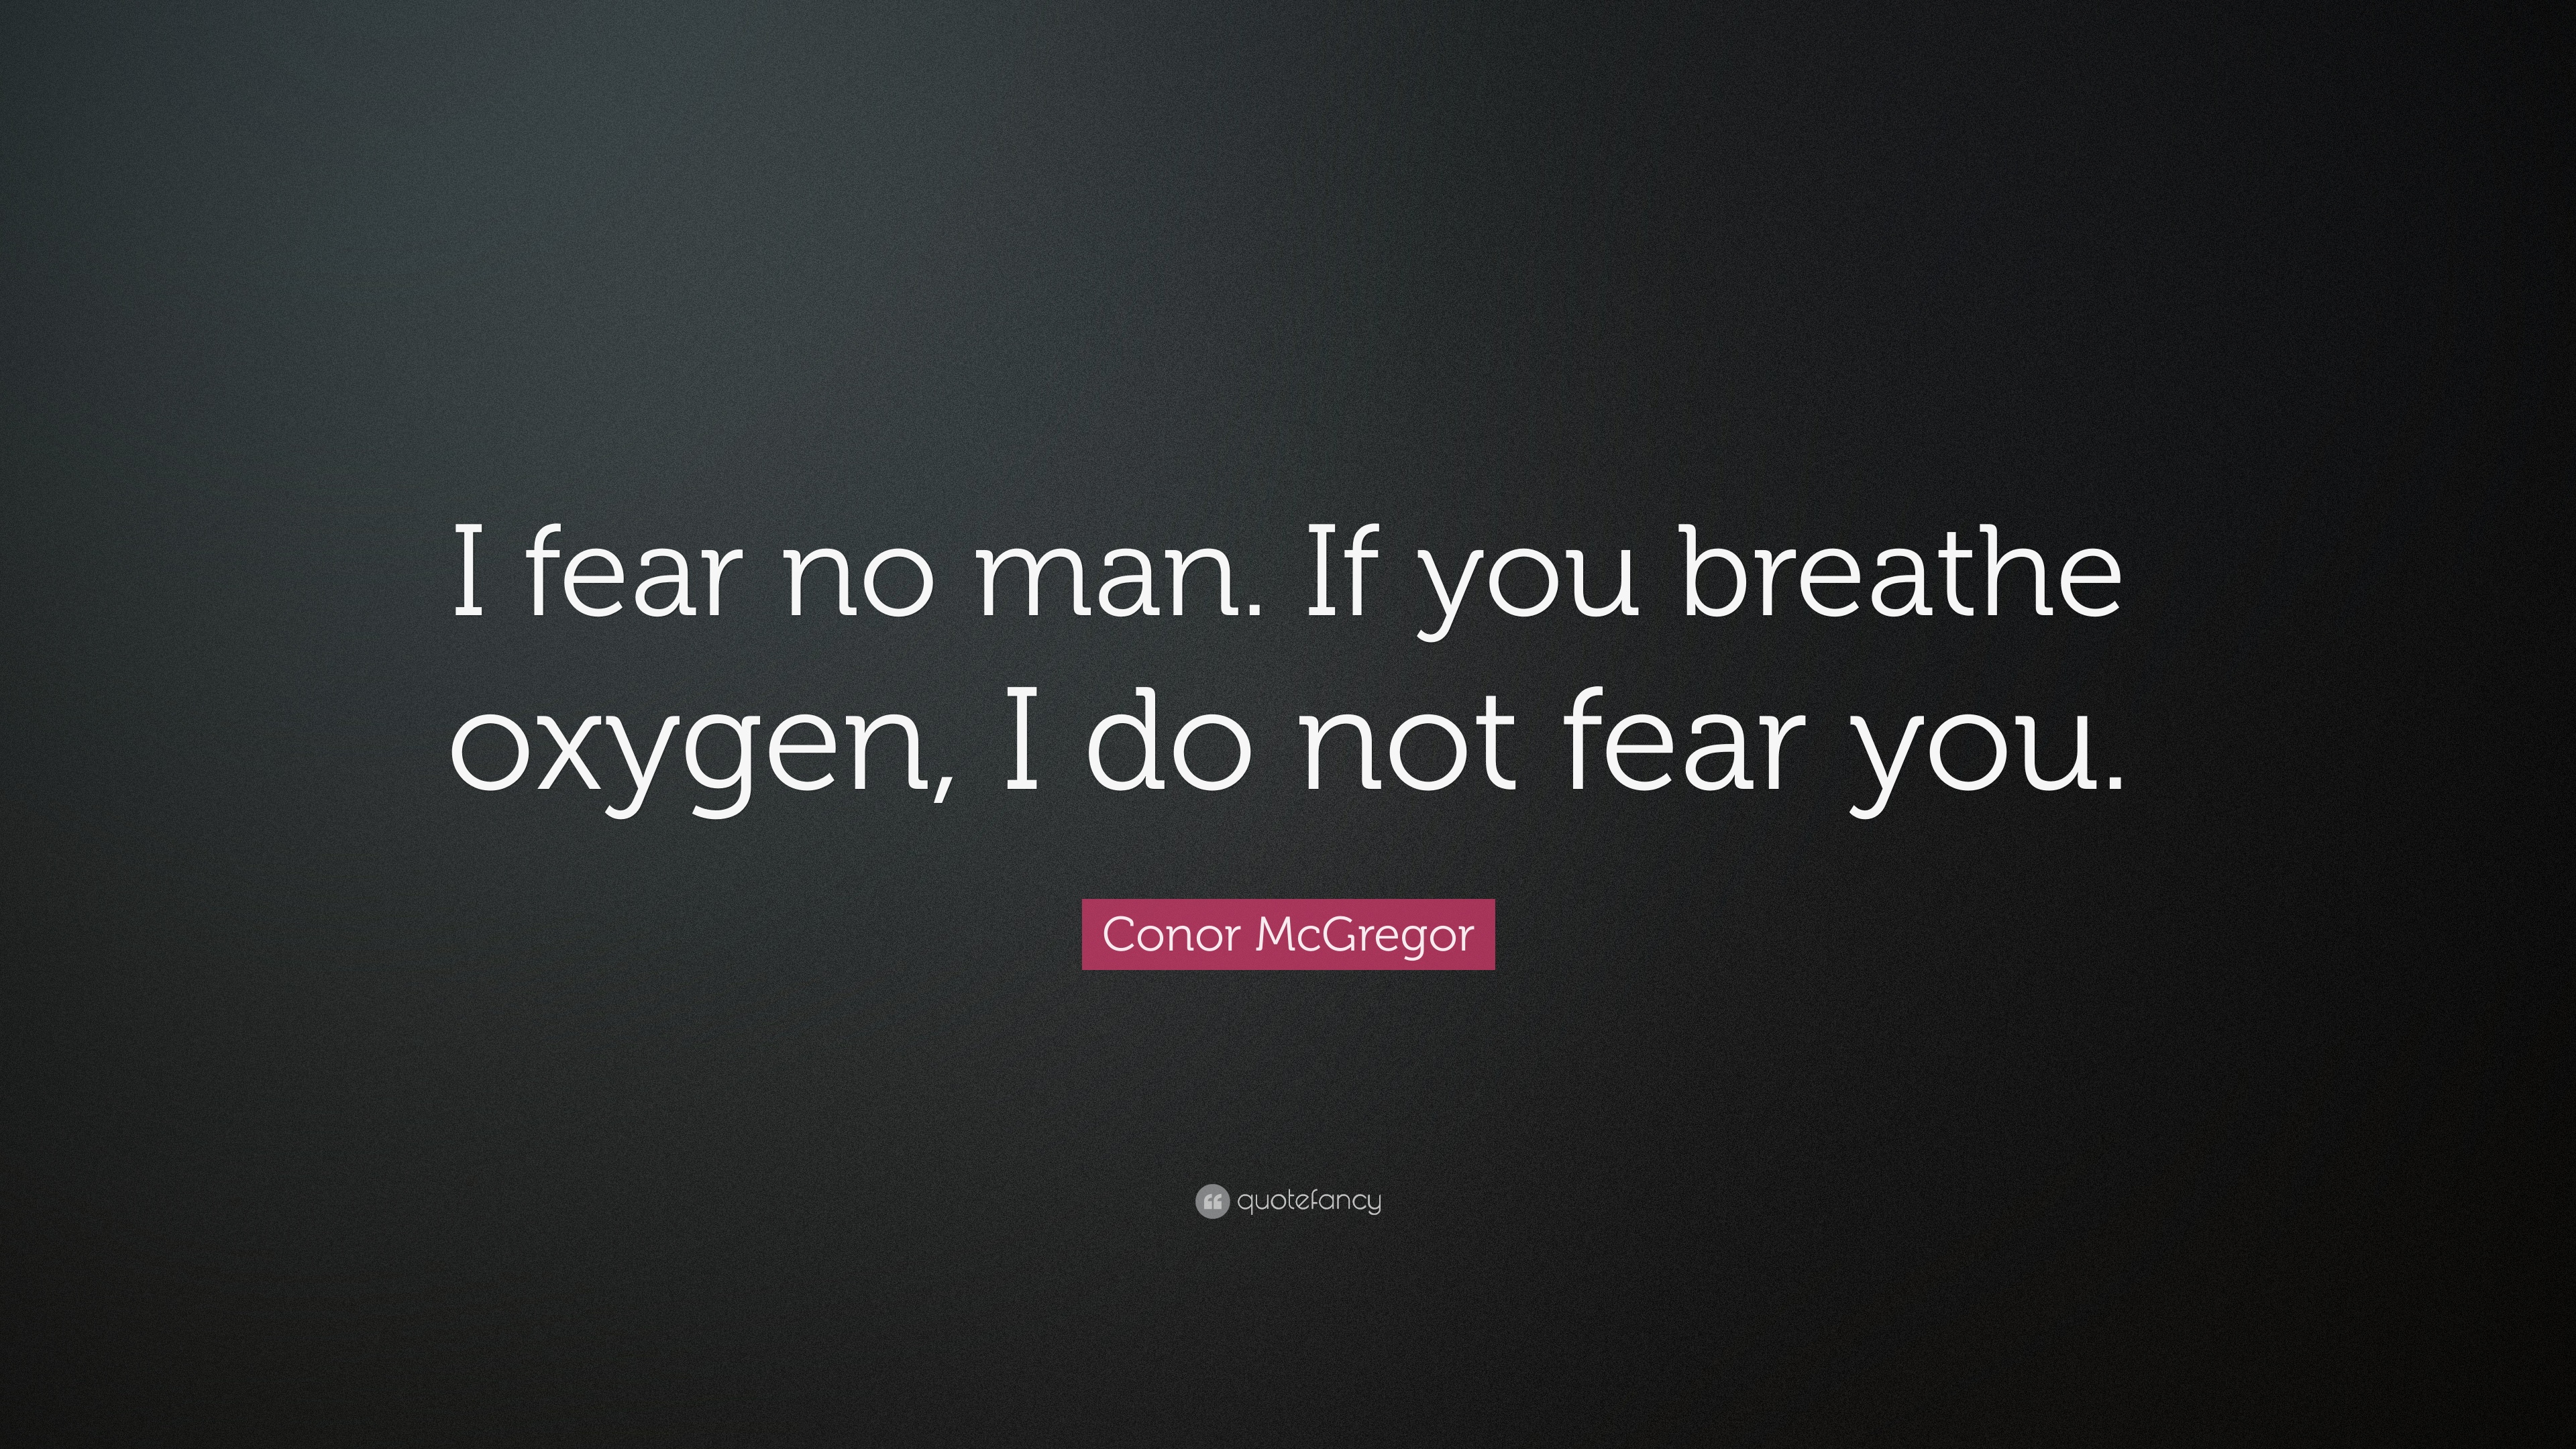 57841-Conor-McGregor-Quote-I-fear-no-man-If-you-breathe-oxygen-I-do-not